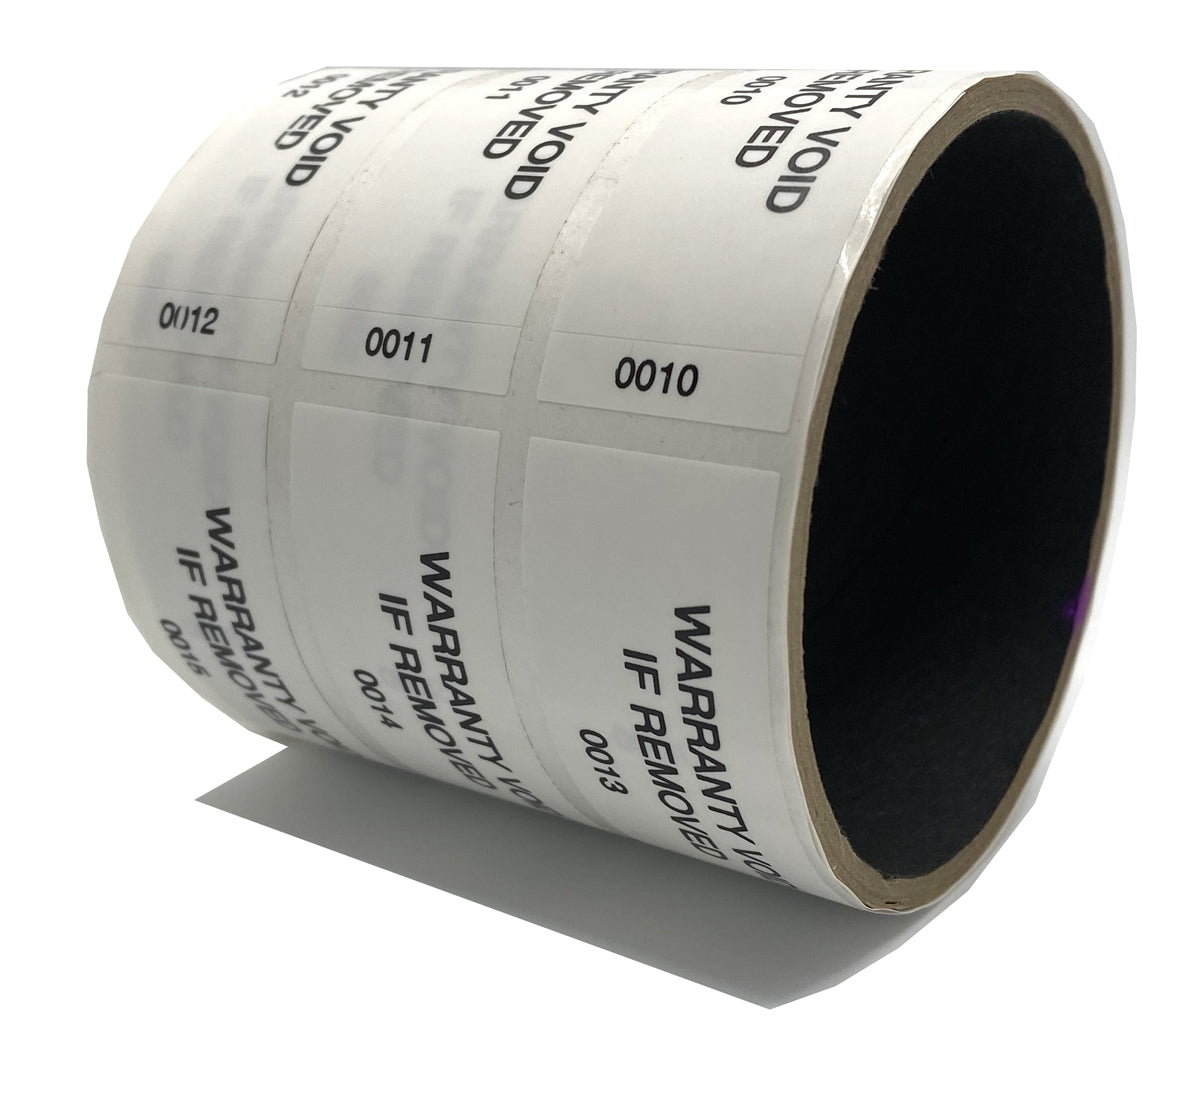 2,000 Tamper Evident White Non Residue Security Labels TamperGuard® Seal Sticker, Rectangle 2.75" x 1" (70mm x 25mm). Printed: Warranty Void if Removed + Serialized